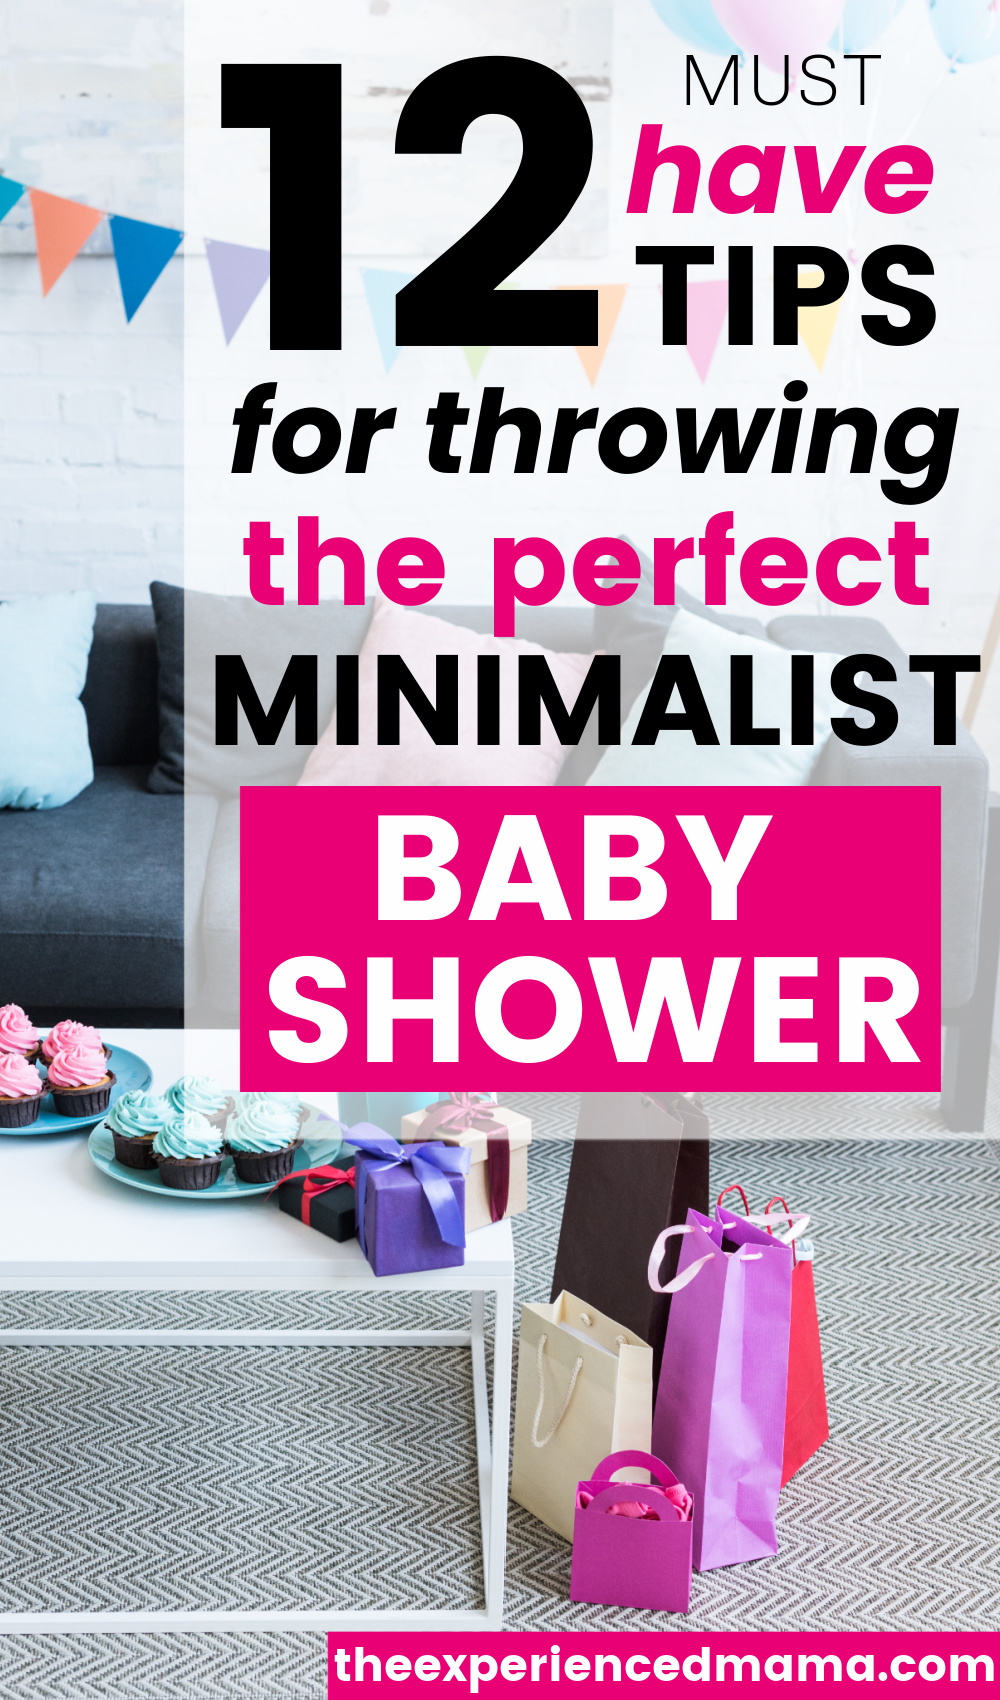 simple baby shower set up in living room, with text overlay, "12 must have tips for throwing the perfect minimalist baby shower"